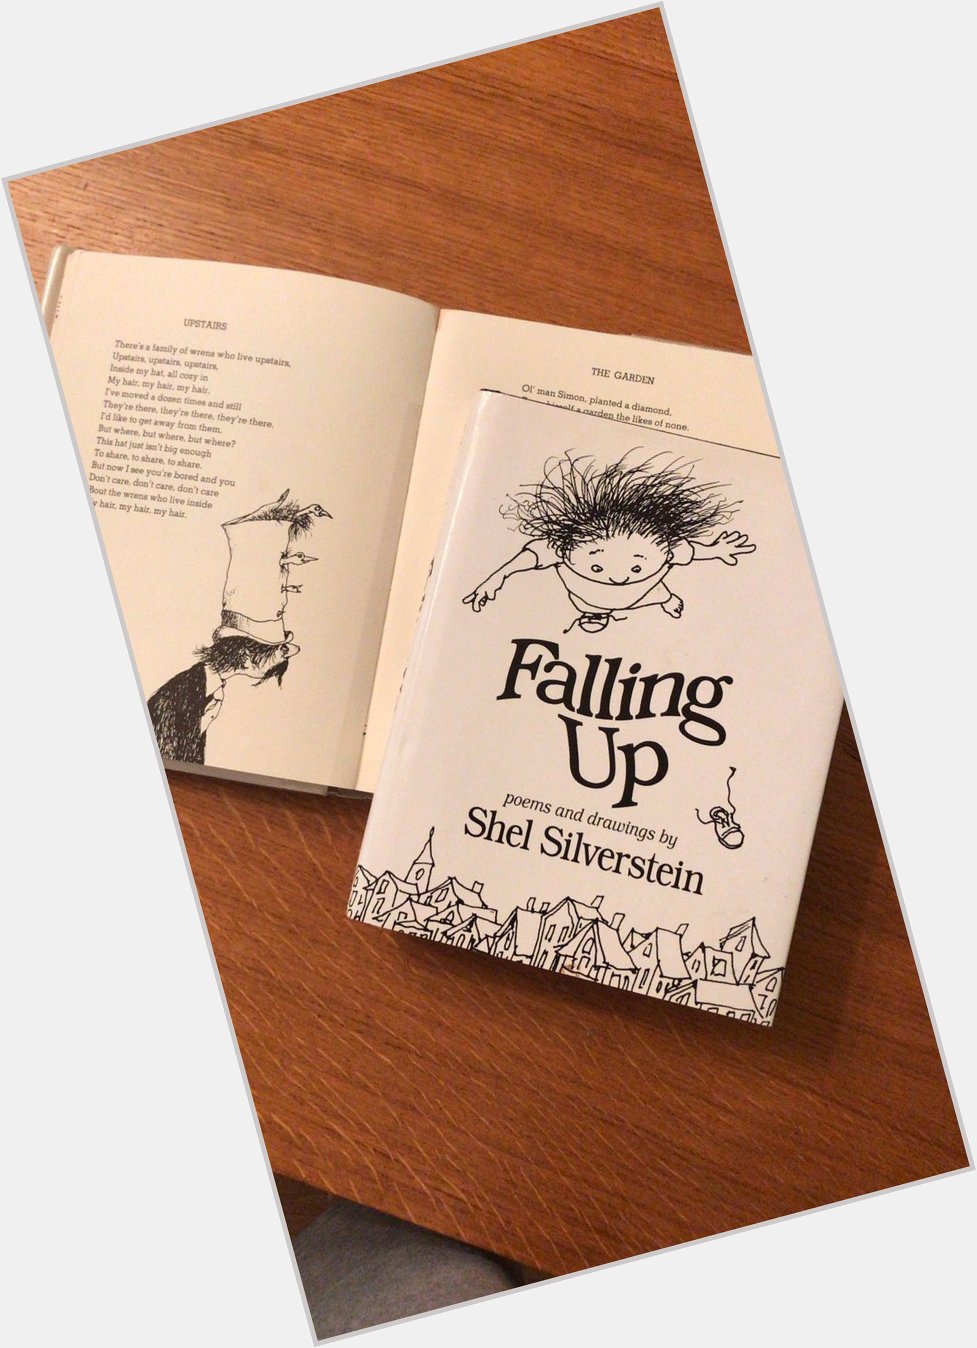 My seven-year-old daughter has been DELIGHTED to discover these just this week. 

Happy birthday Shel Silverstein. 